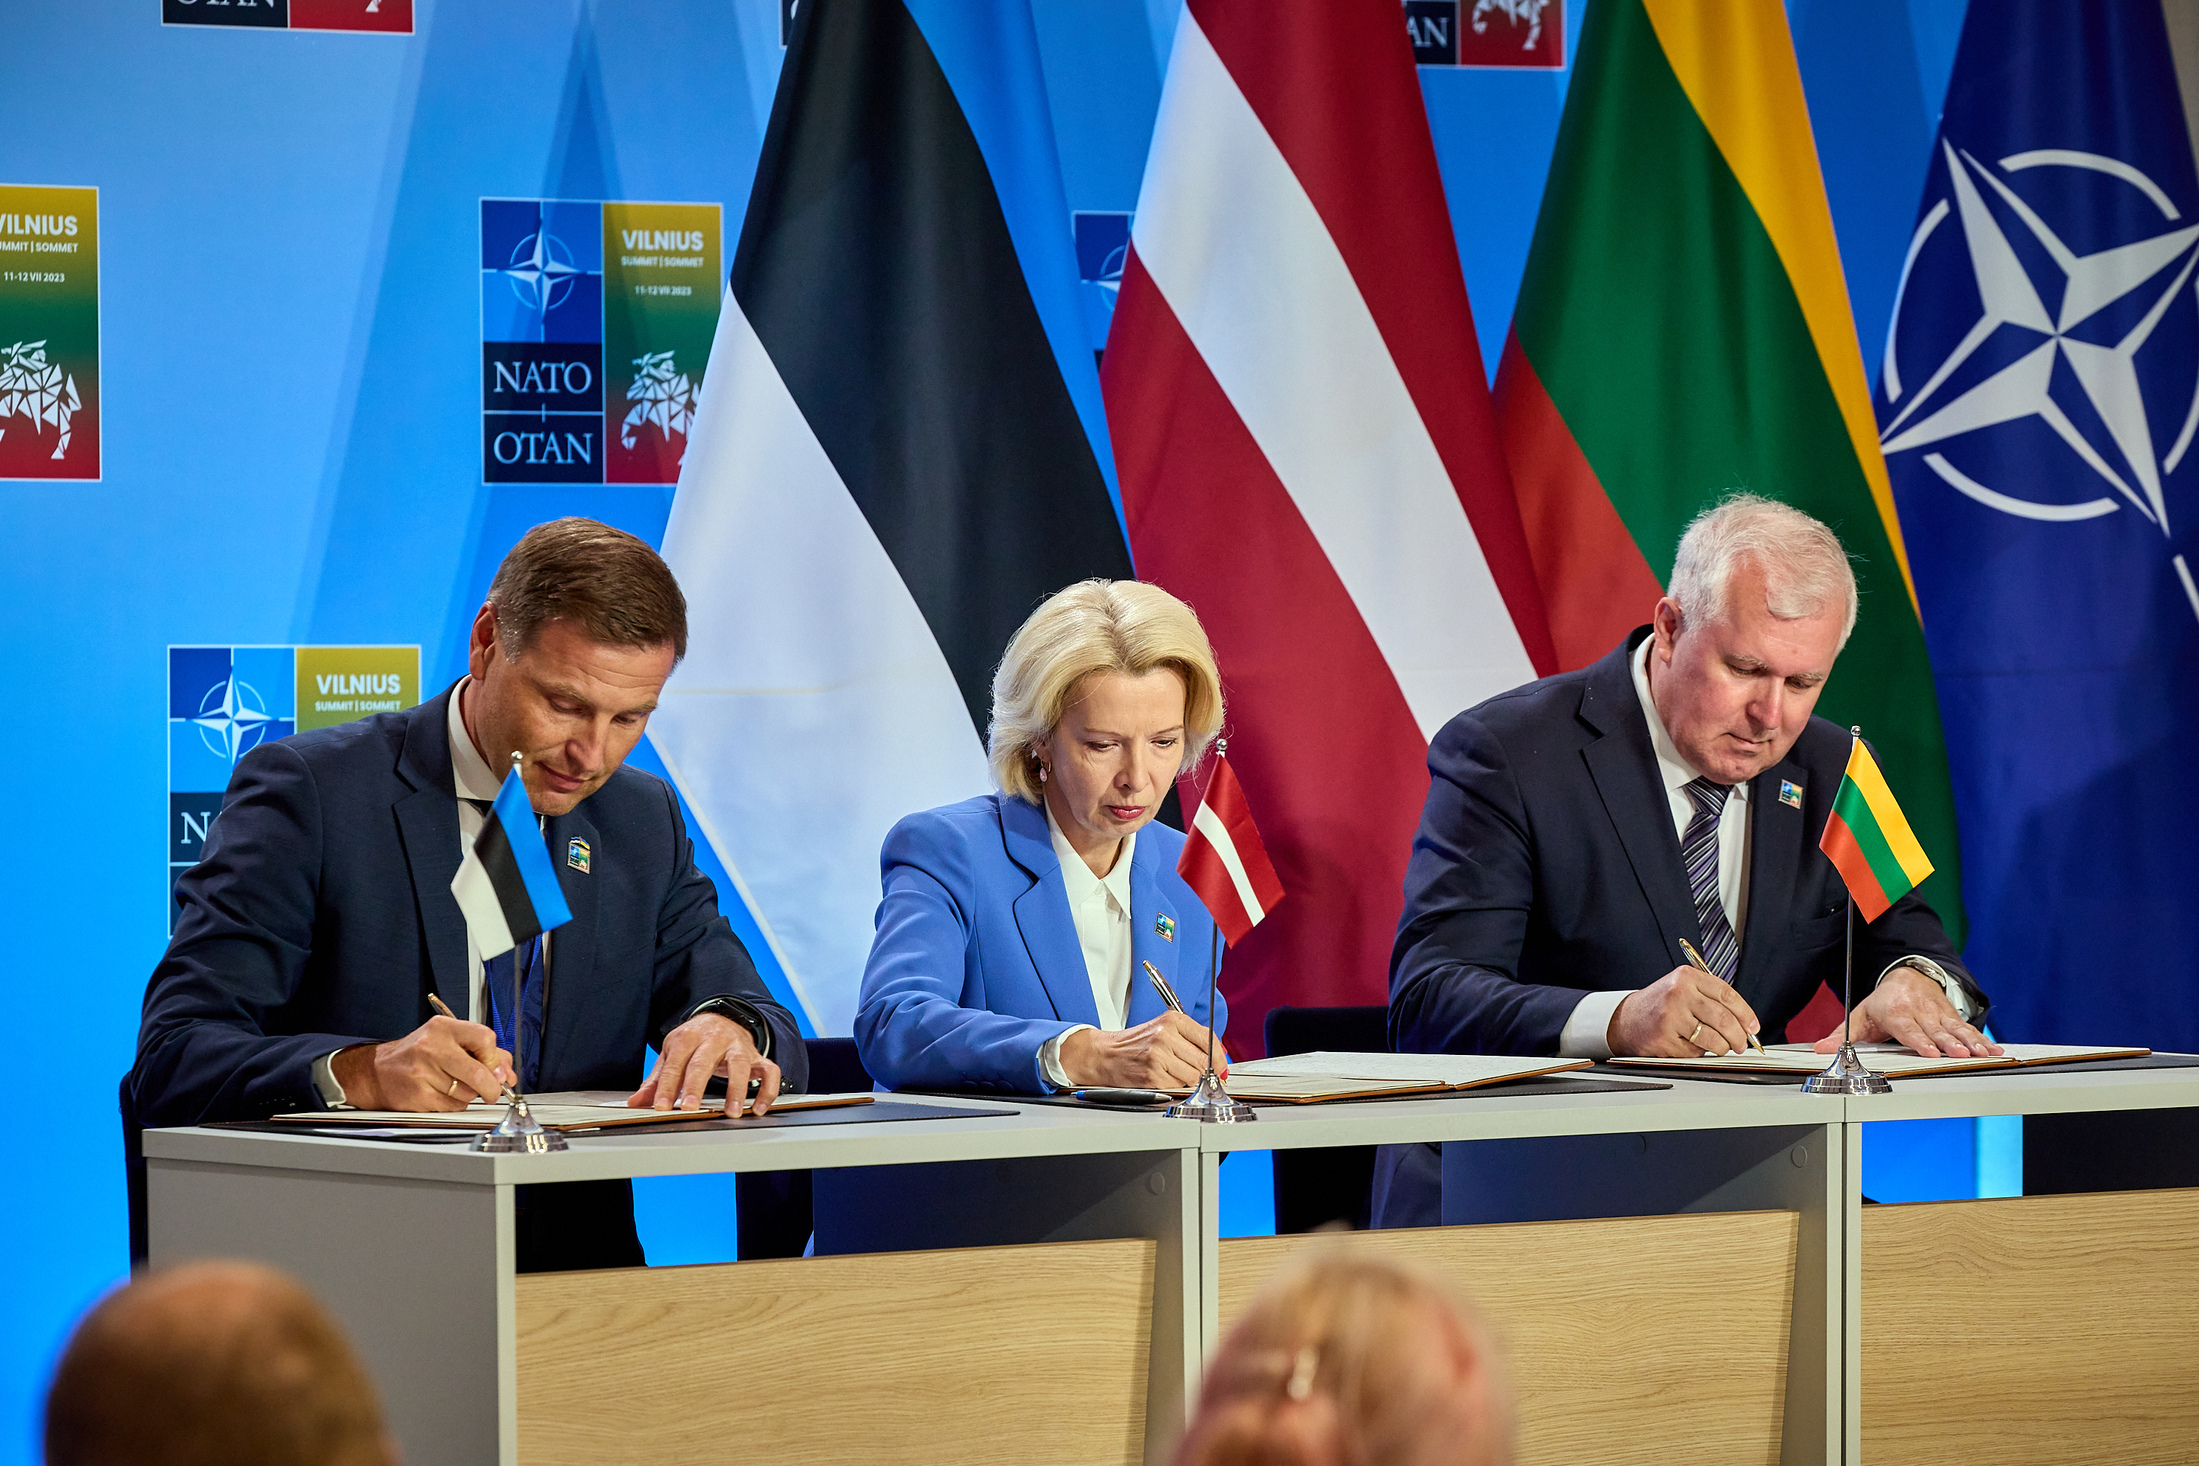 The Vilnius NATO Summit Brings Opportunities for Closer Nordic-Baltic Integration